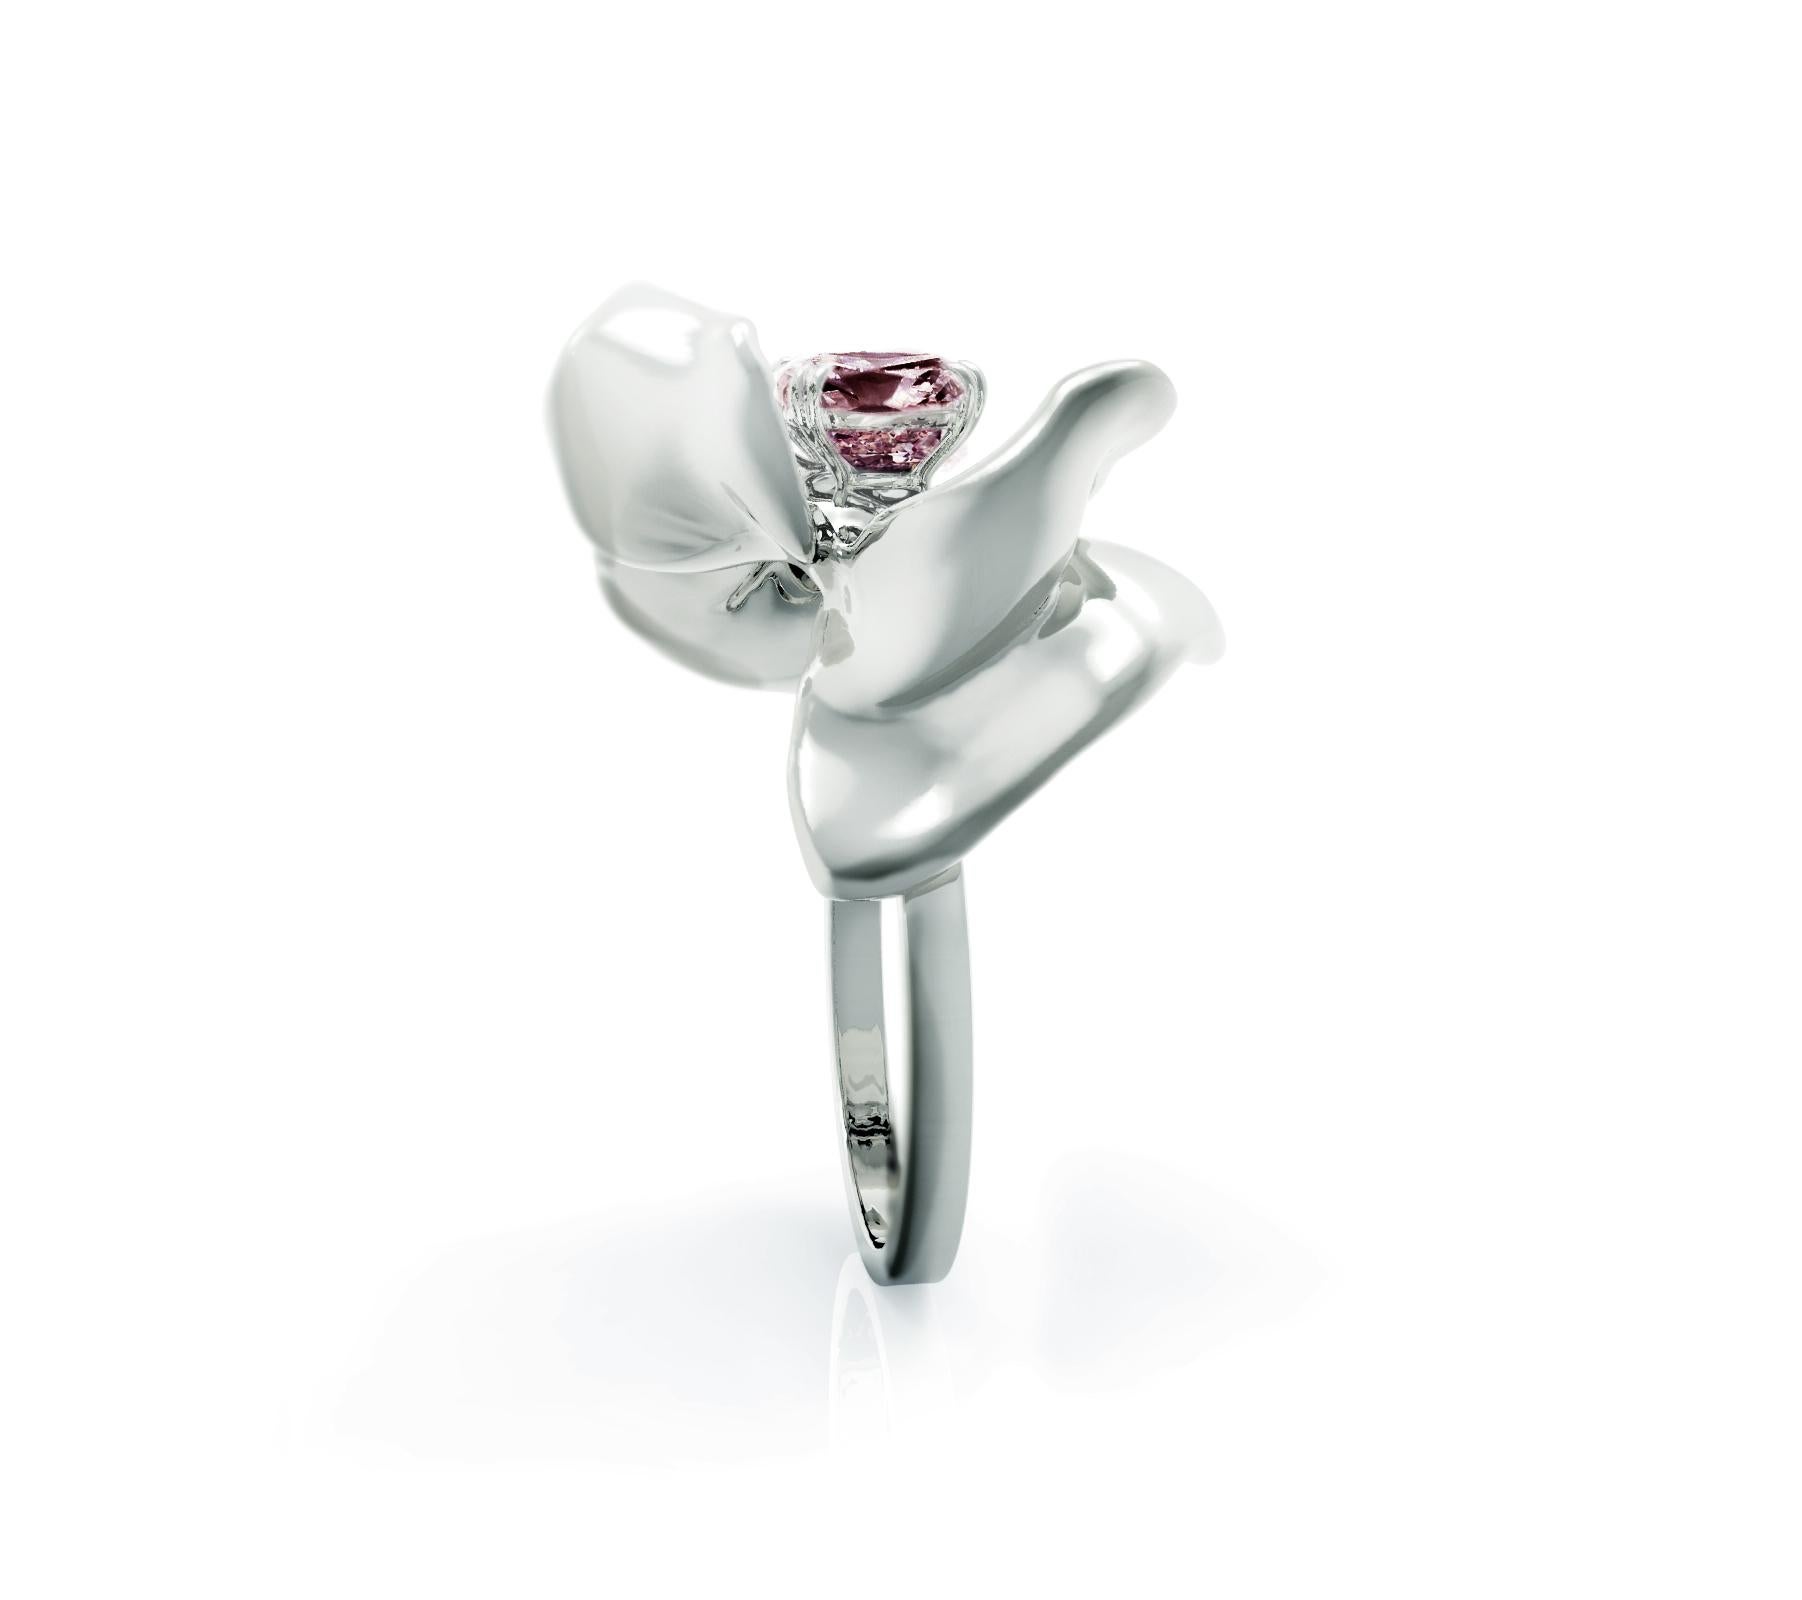 Women's 18 Karat White Gold Contemporary Cocktail Ring with Berry Spinel by Artist For Sale